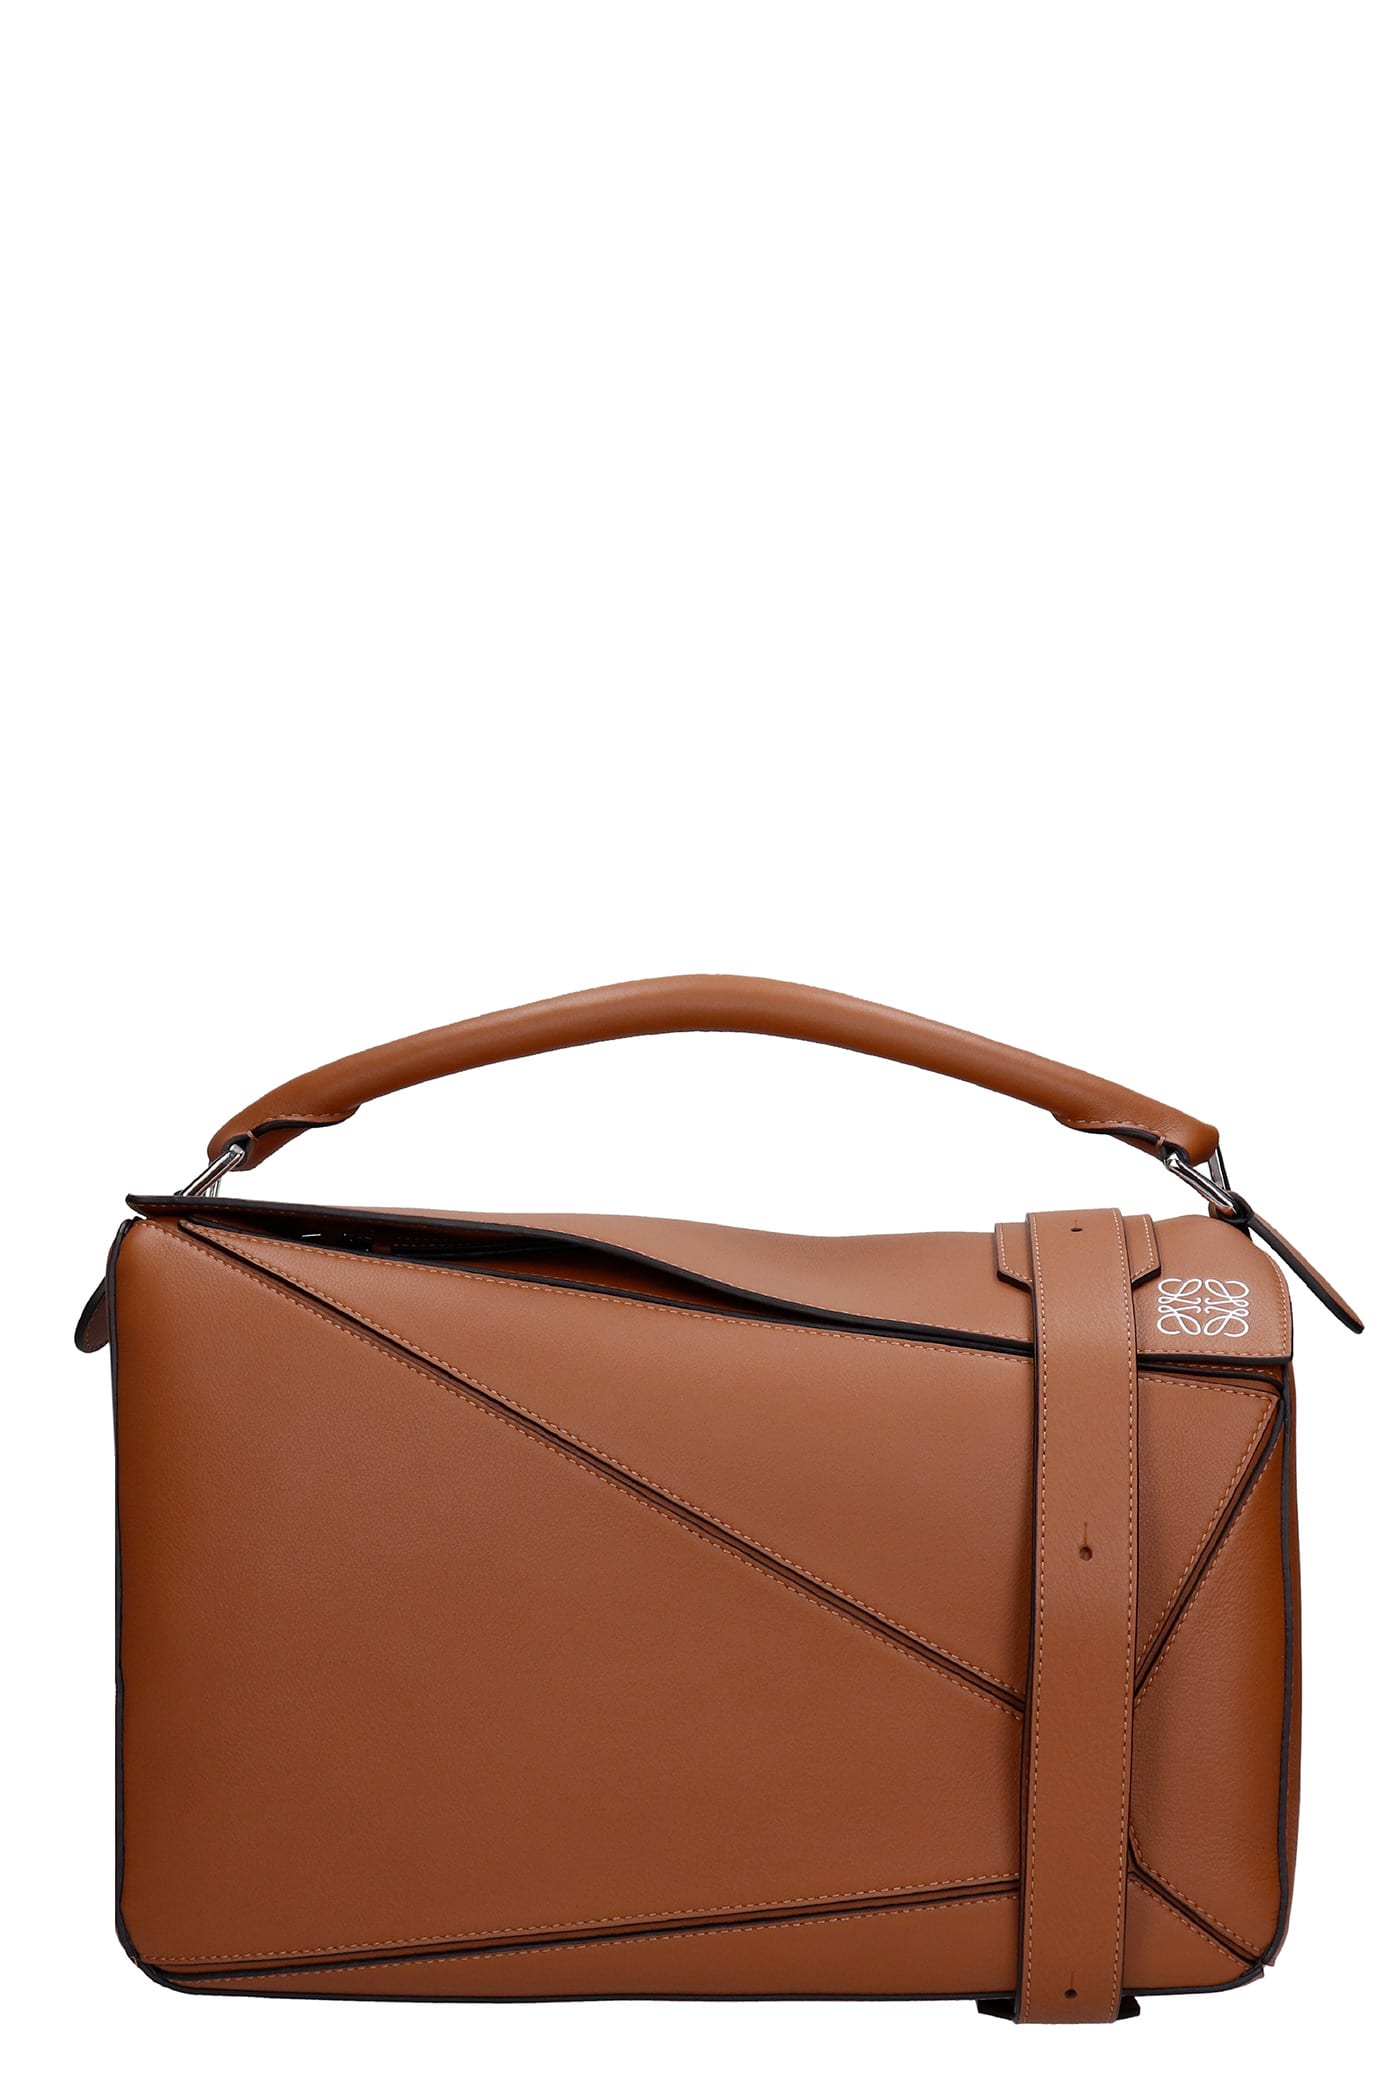 Loewe Puzle Grande Hand Bag In Leather Color Leather